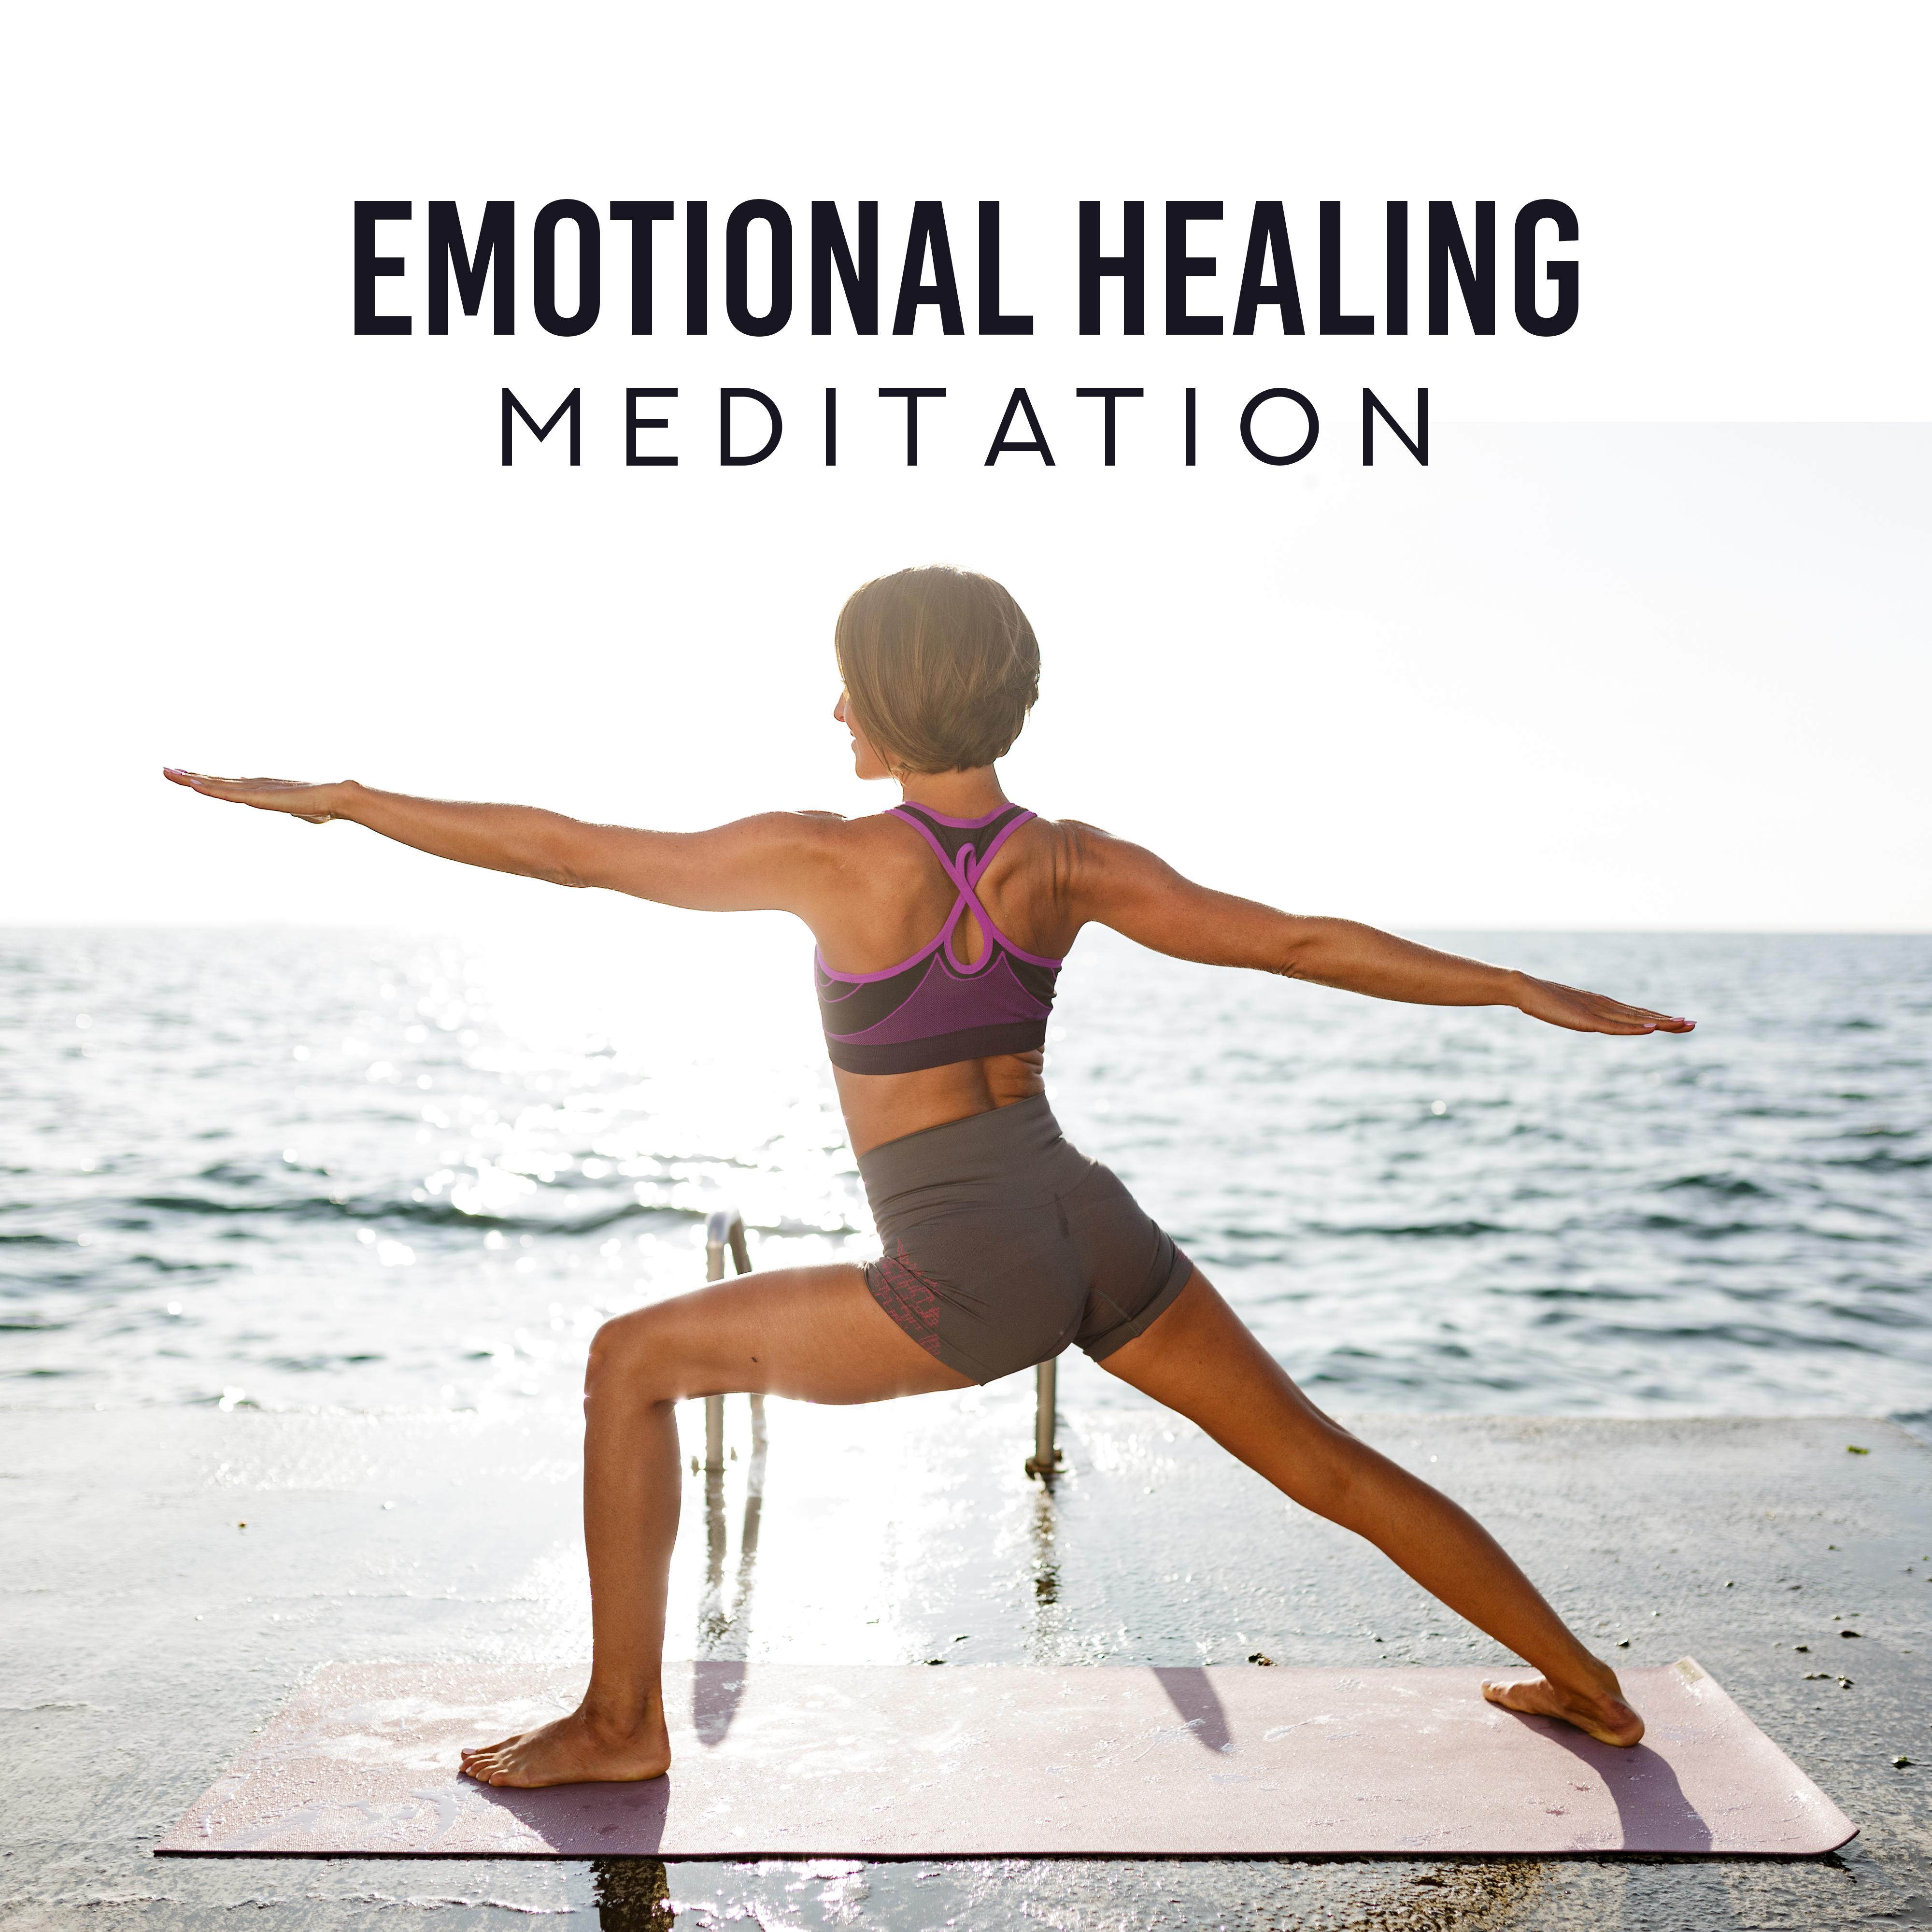 Emotional Healing Meditation - Soothing Wounds, Spiritual and Physical Pain, Effects of Excessive Stress, Liberating from Negative Thoughts, Feelings and Emotions